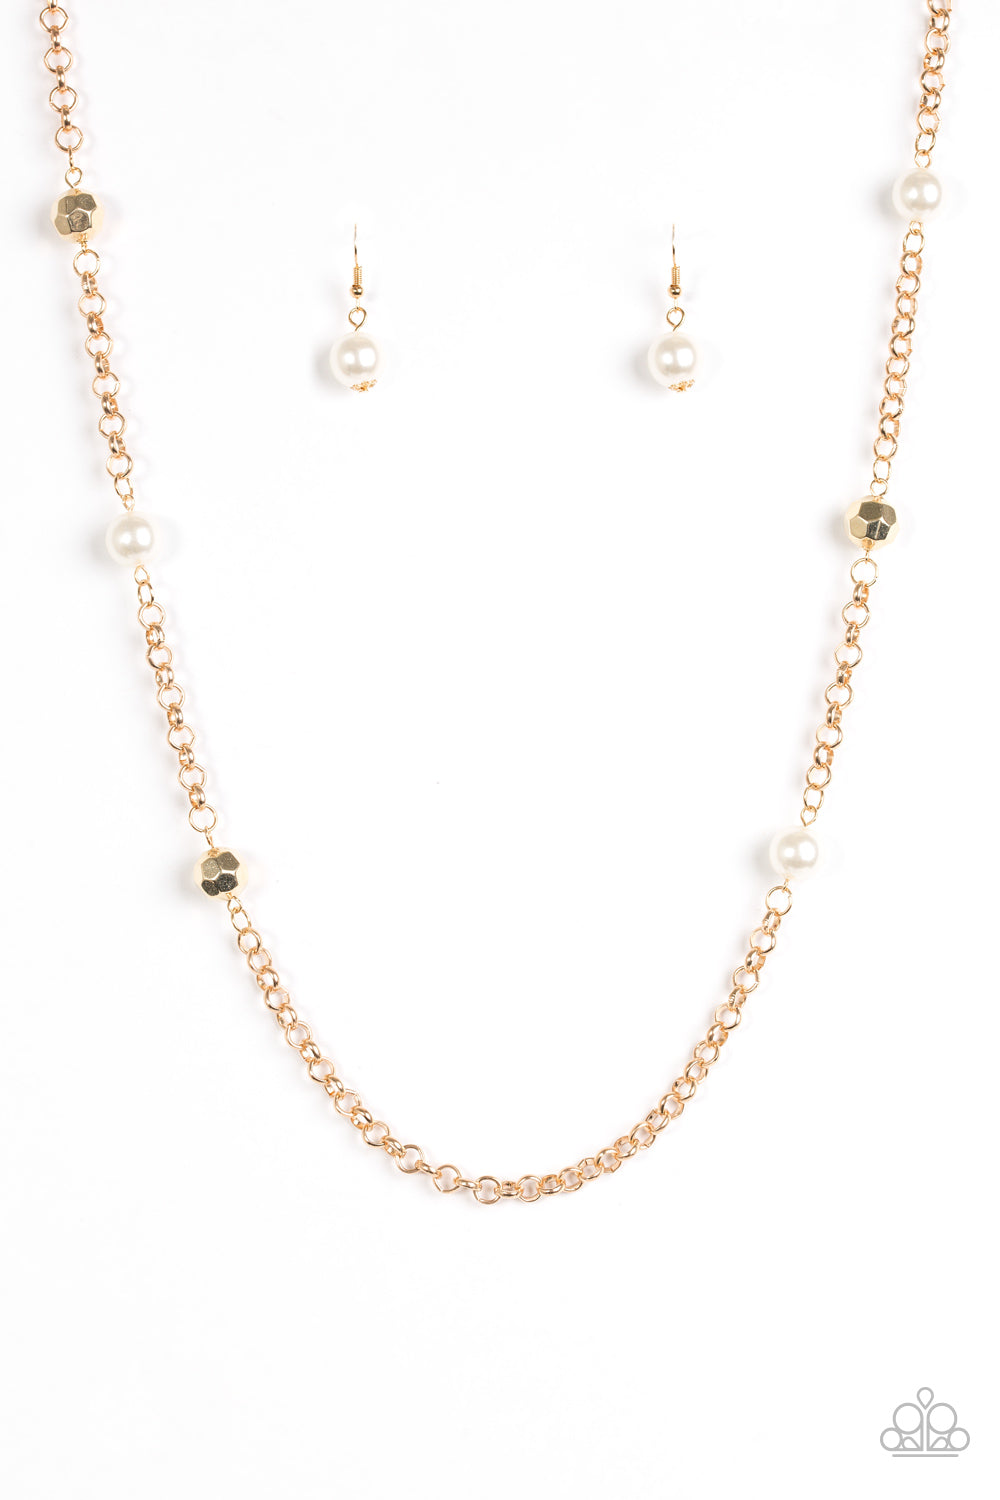 Showroom Shimmer - Paparazzi - Gold and White Pearl Bead Necklace